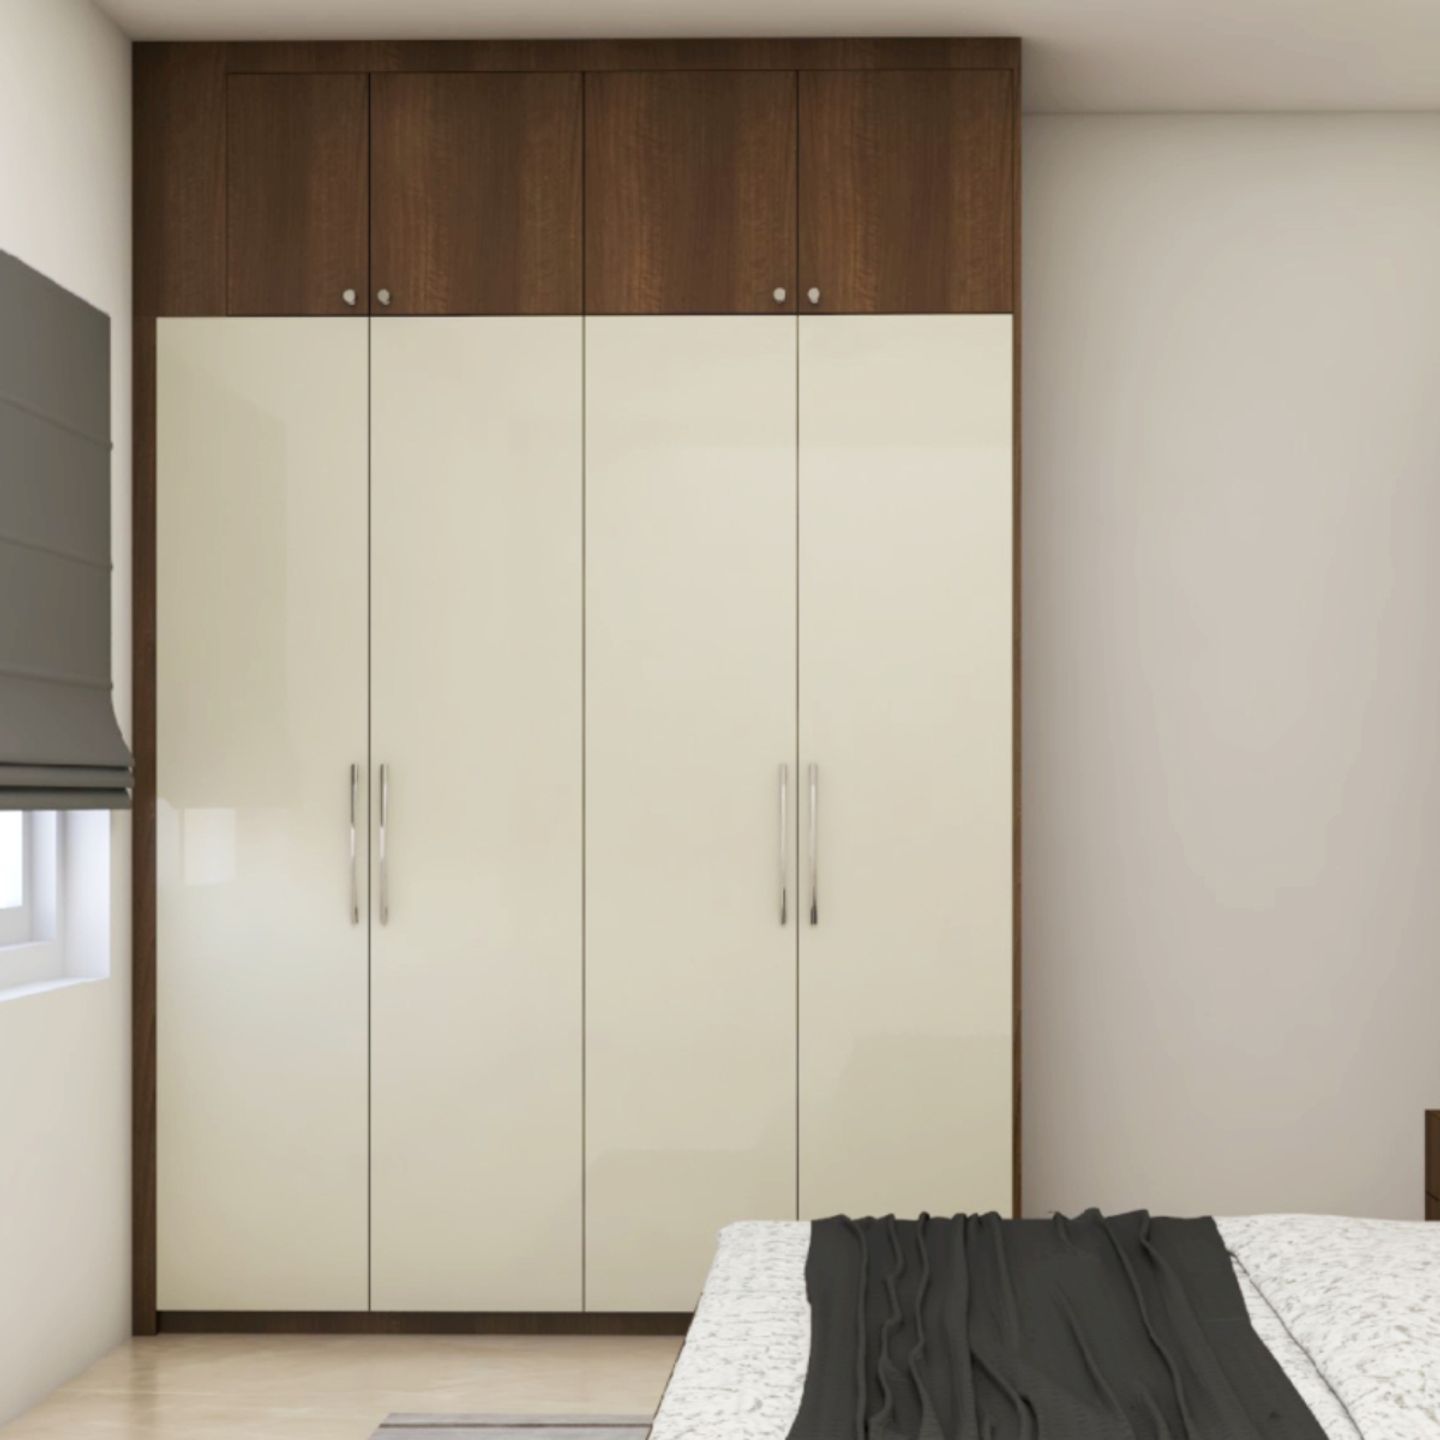 4-Door Swing Wardrobe Design With A Glossy Finish - Livspace